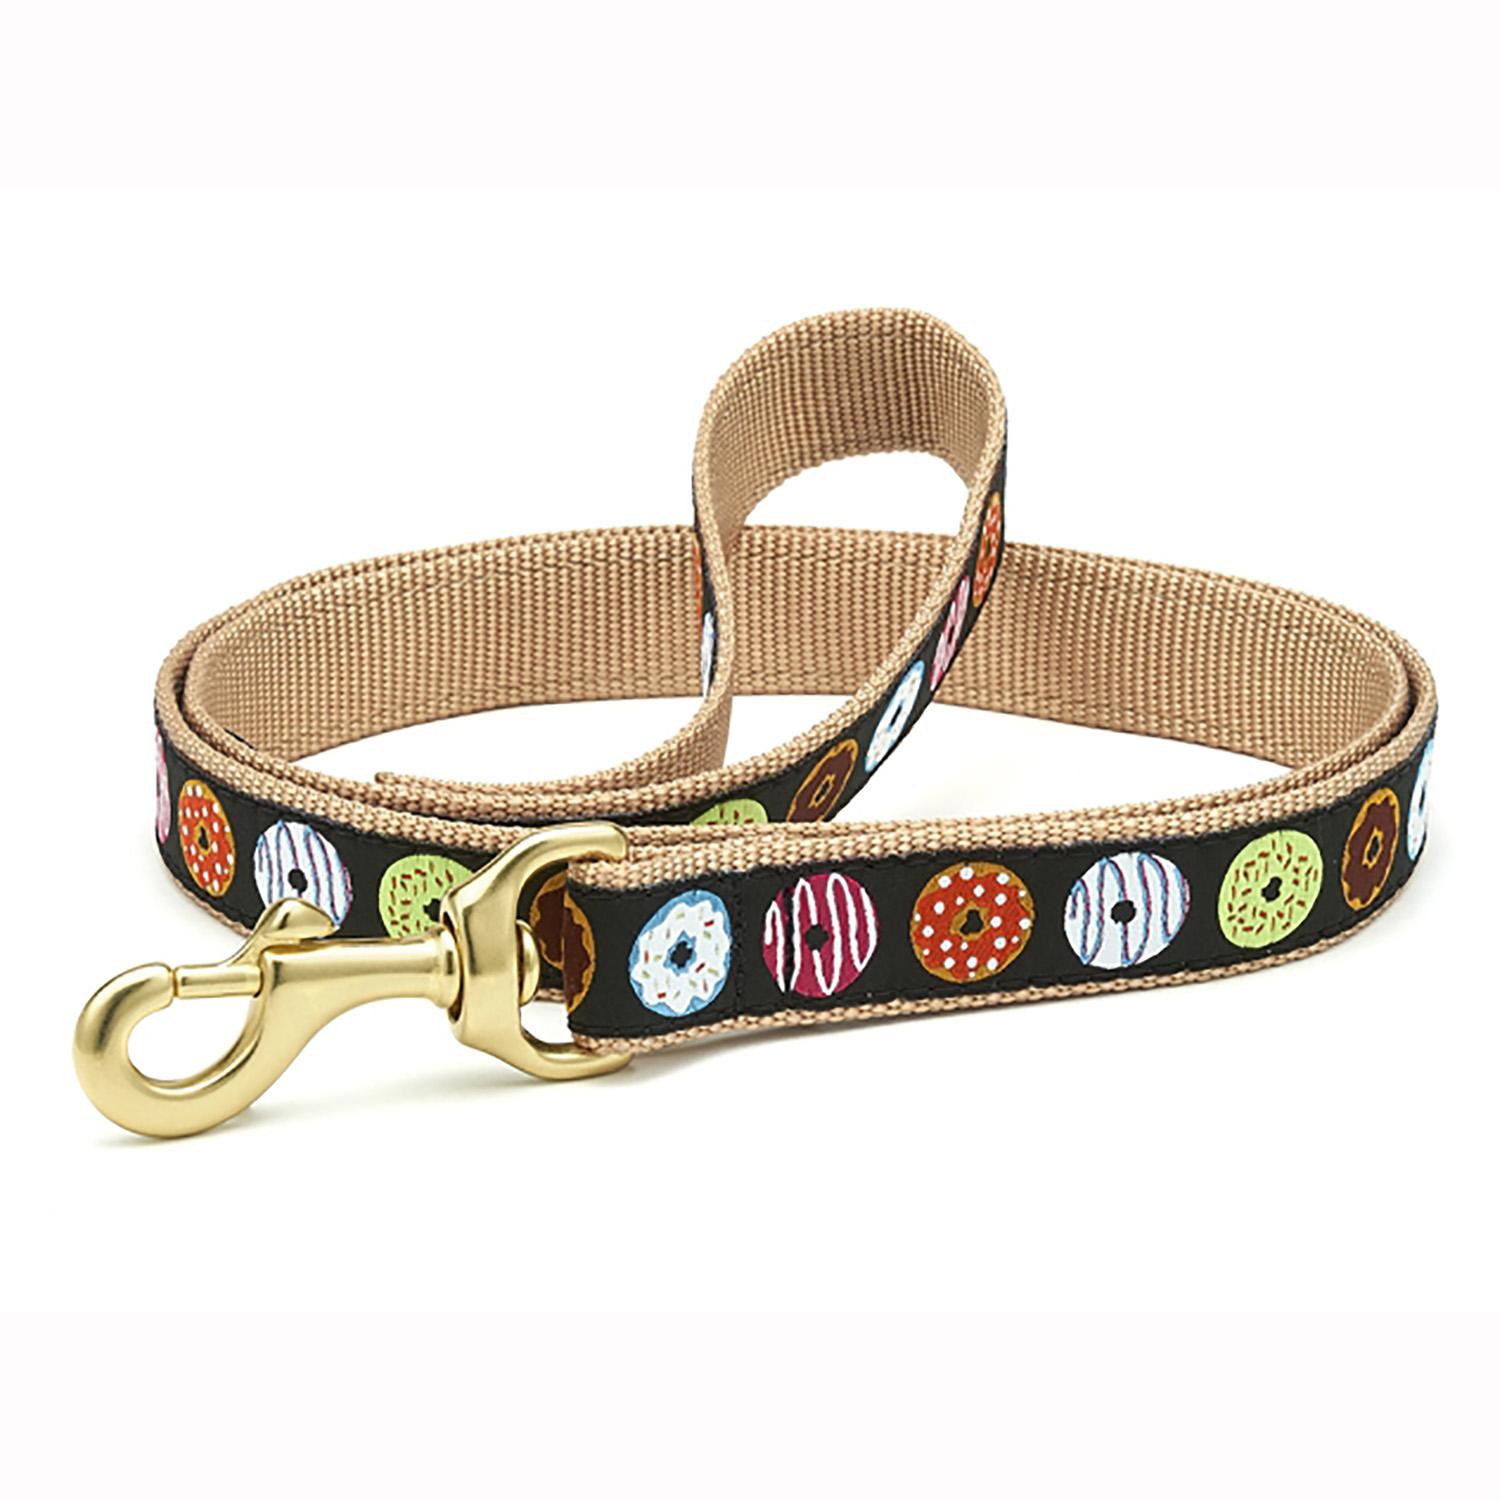 Donuts Dog Leash by Up Country